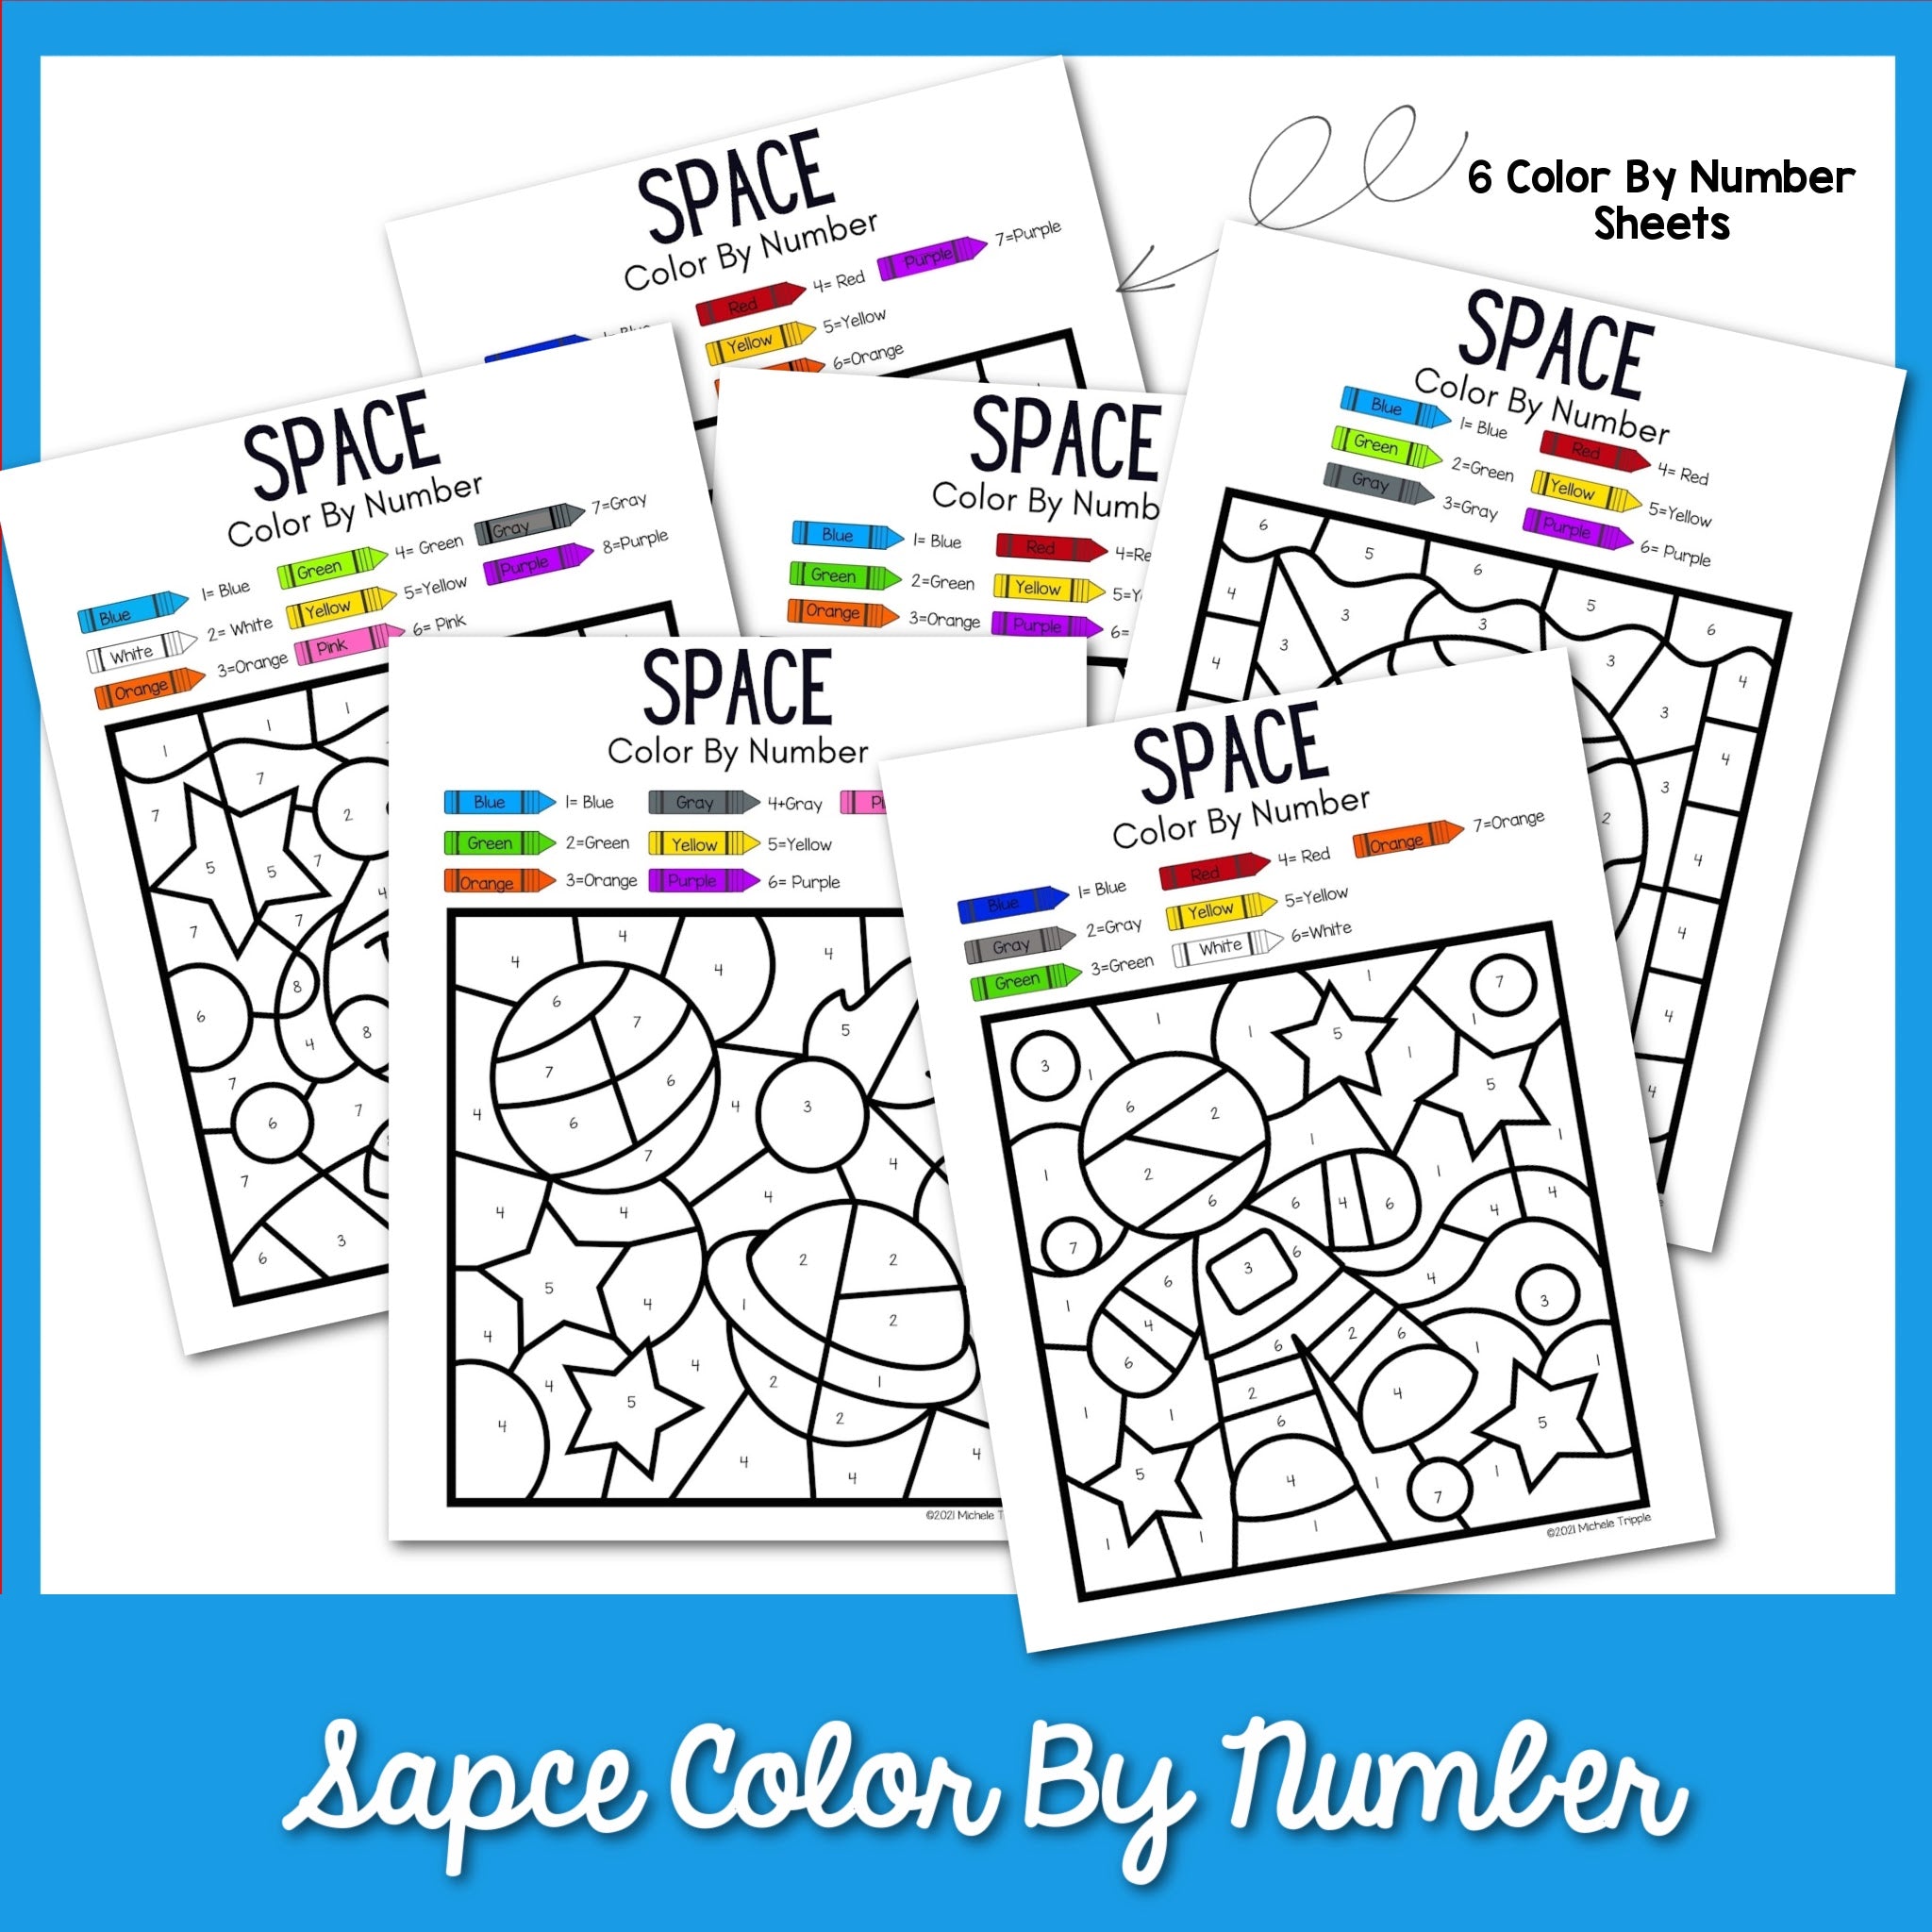 Space Color by Number